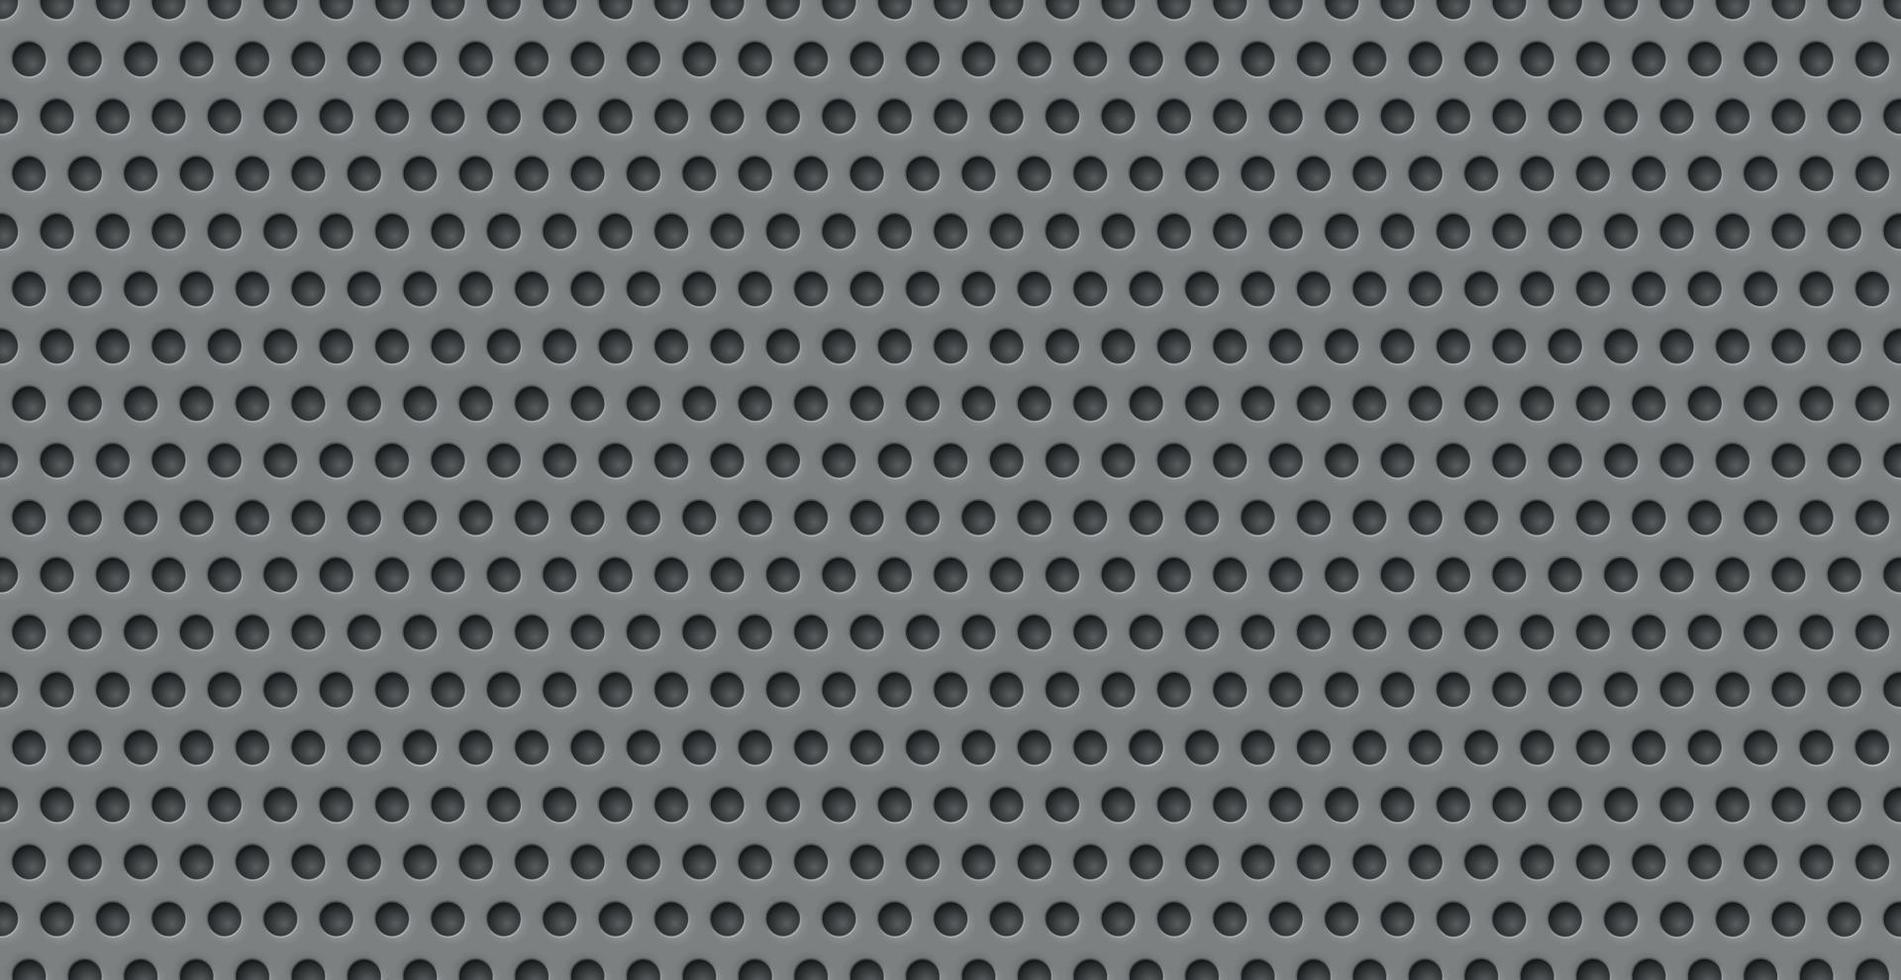 Gray perforated background, many of the same holes vector